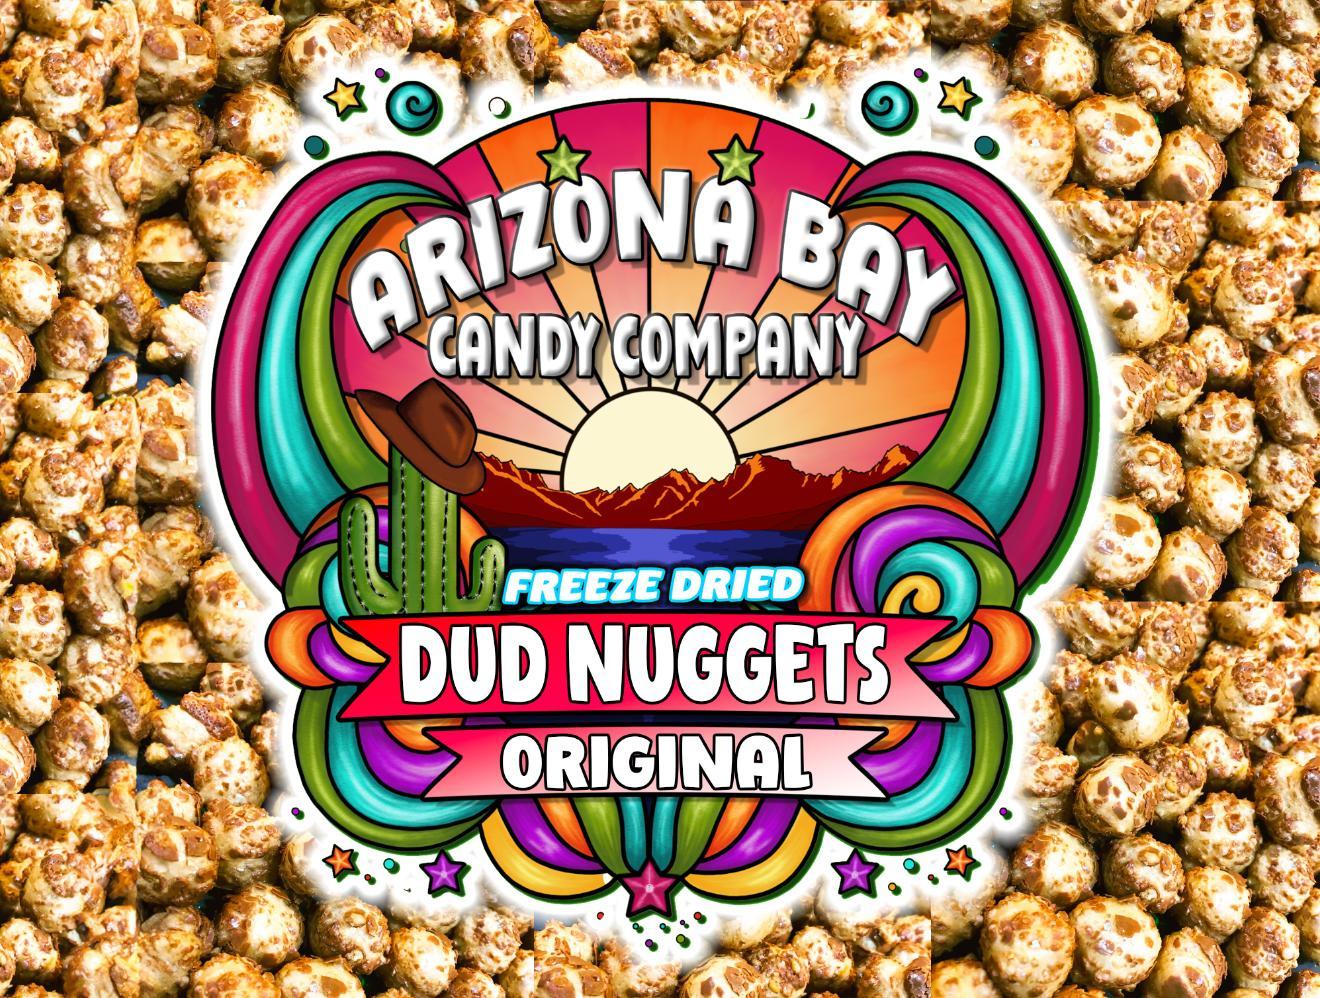 DUD NUGGETS FREEZE DRIED CANDY